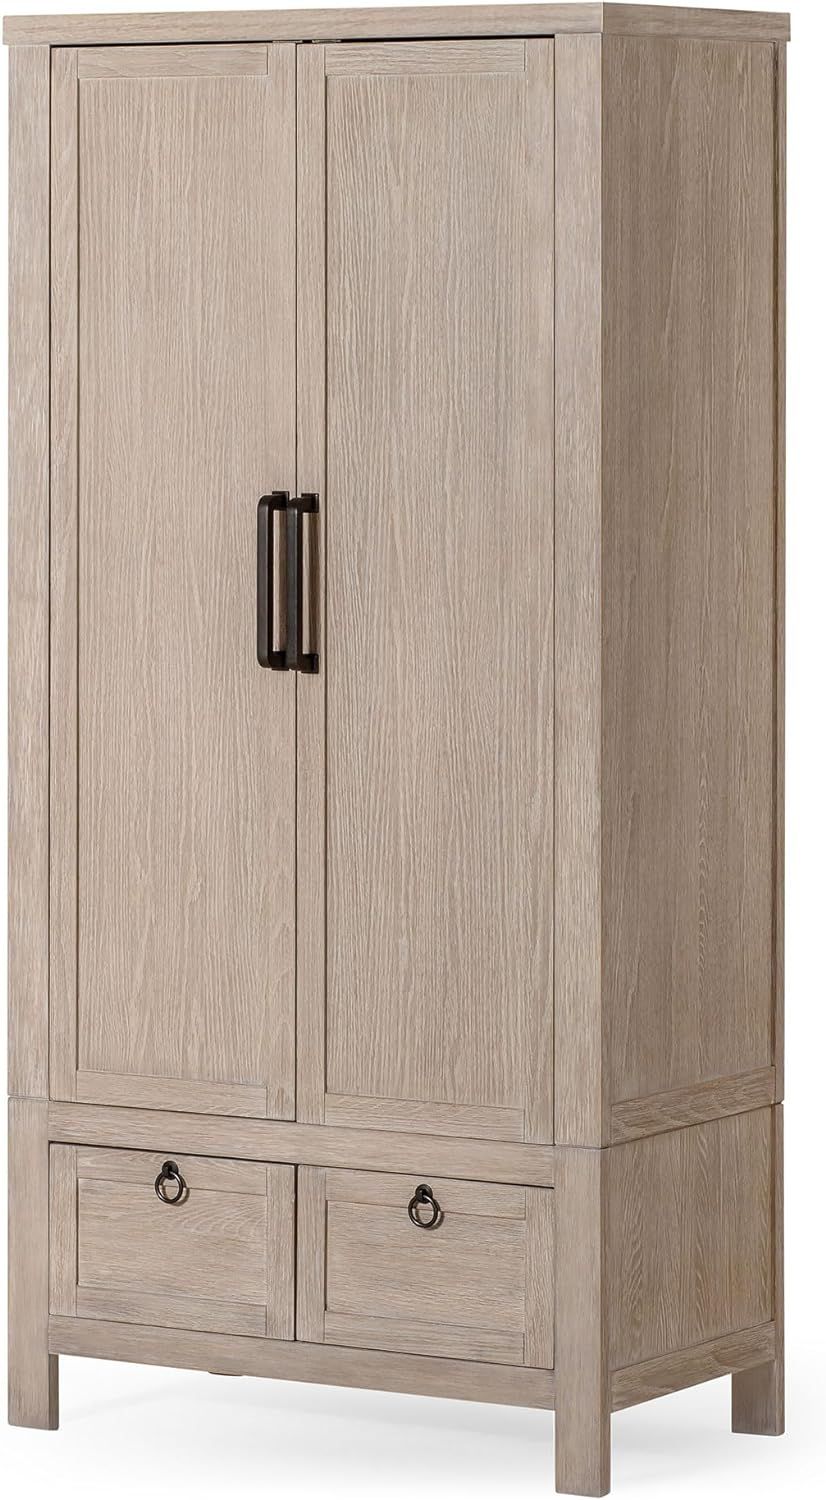 Maven Lane Vaughn Rustic Wooden Cabinet in Weathered White Finish | Amazon (US)